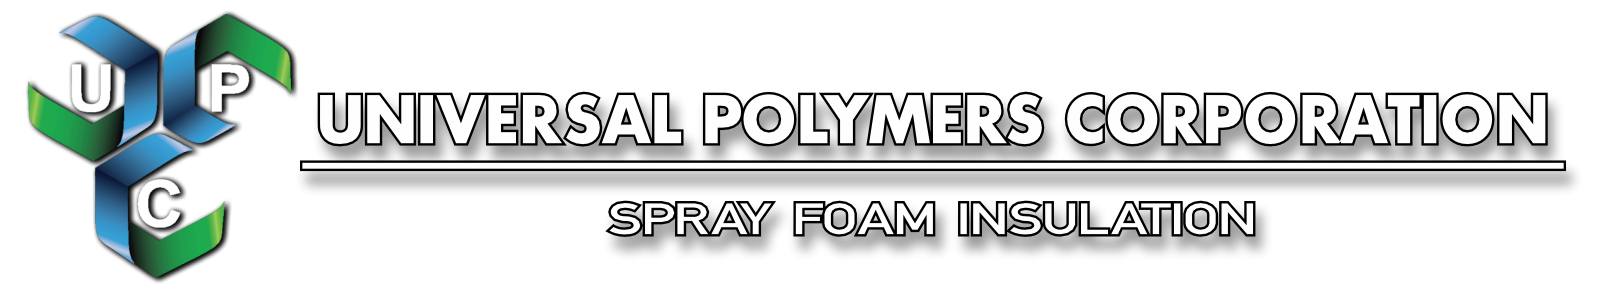 upc universal polymers corp spray foam is now available through appalachian insulation supply inc